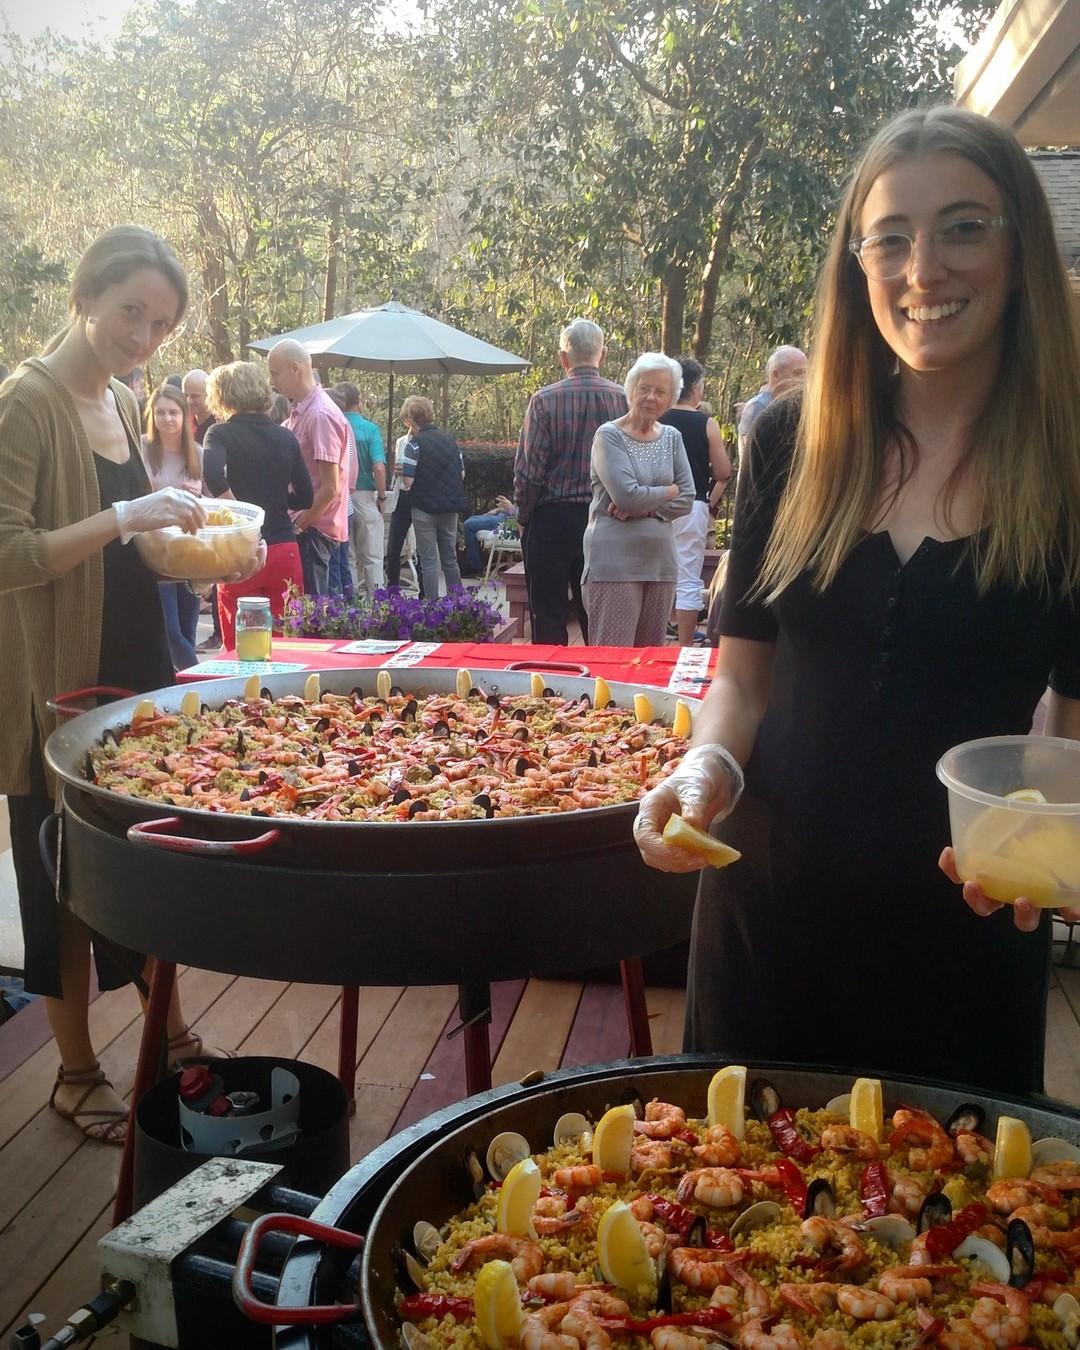 National Paella Day may have been March 27th, but they can be celebrated any day of the year! Every event can be made better with a delicious paella that the whole party will love! Hire Real Paella to celebrate with a paella today!
#paellaparty #tallahasseecatering #staugustinefoodies